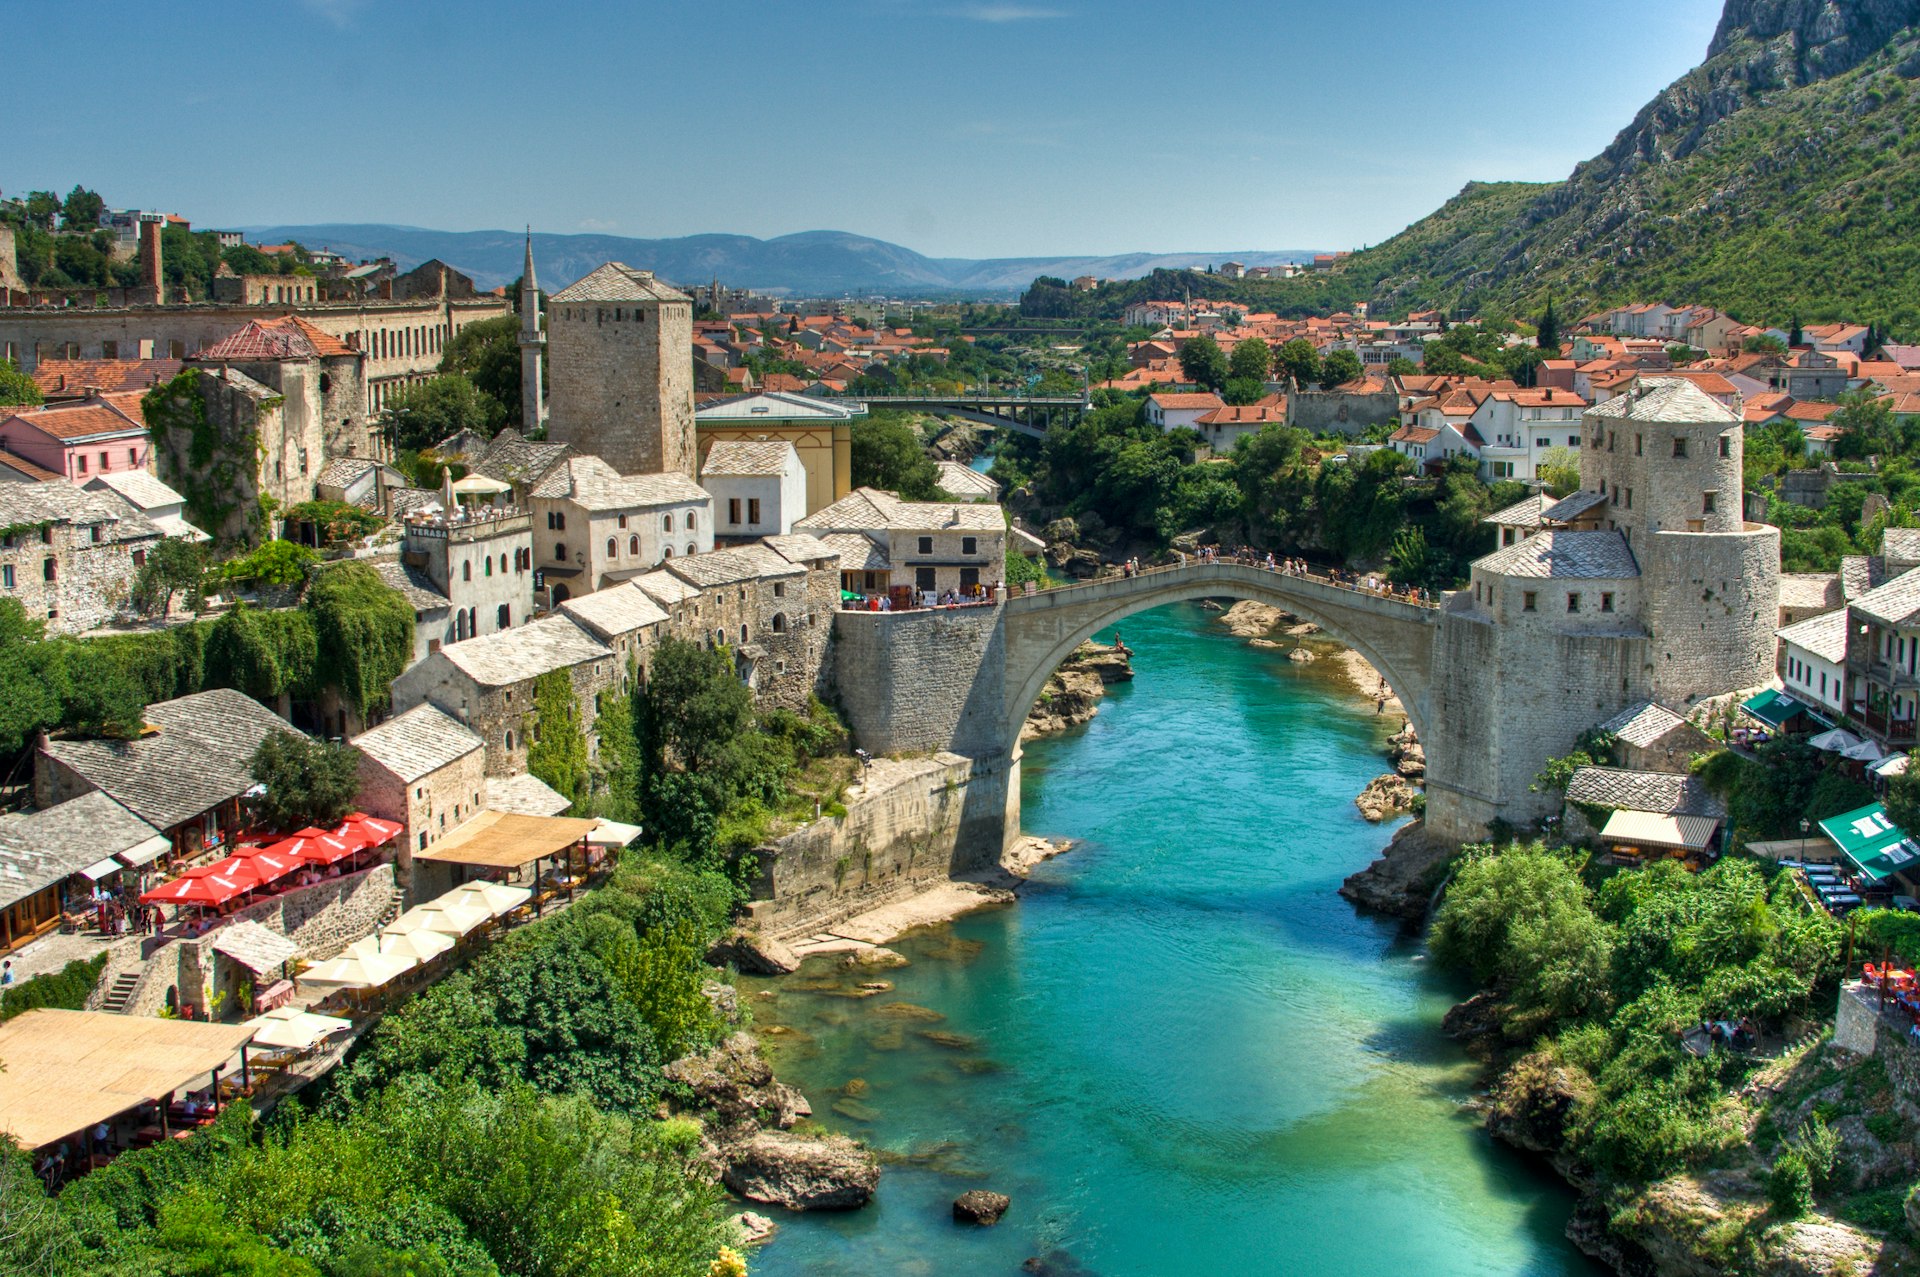 A turquoise river flows underneath an arched bridge, which connects two sides of the city of Mostar